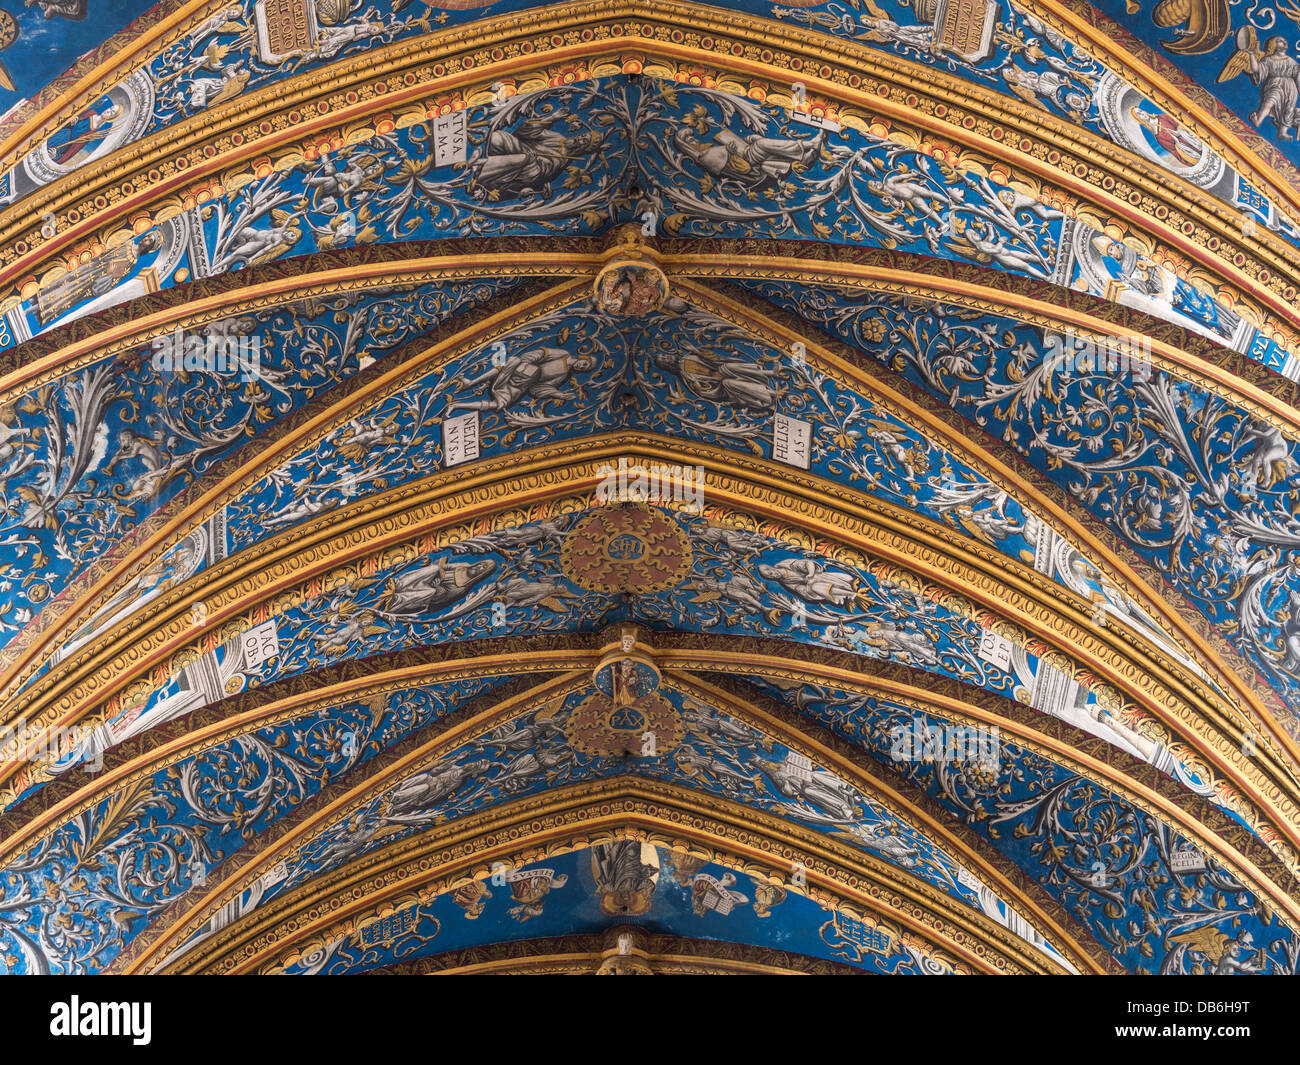 Detail of St Cecil Cathedral Ceiling. The ornate decorations in blue and gold cover the ceiling of the Cathedral. Stock Photo